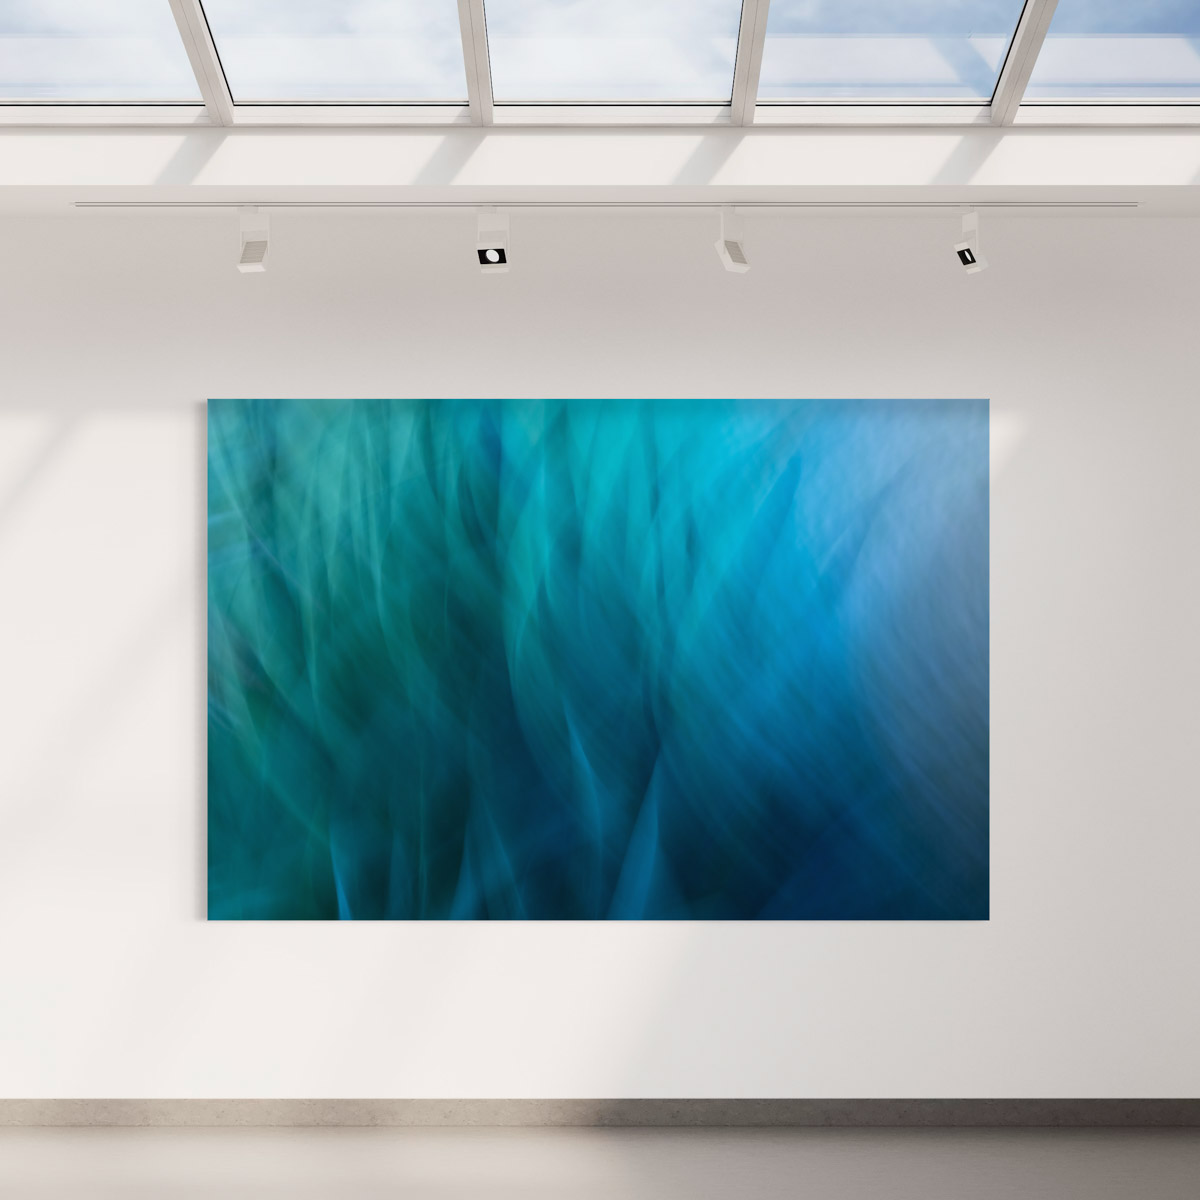 A large painting of blue water in a room.